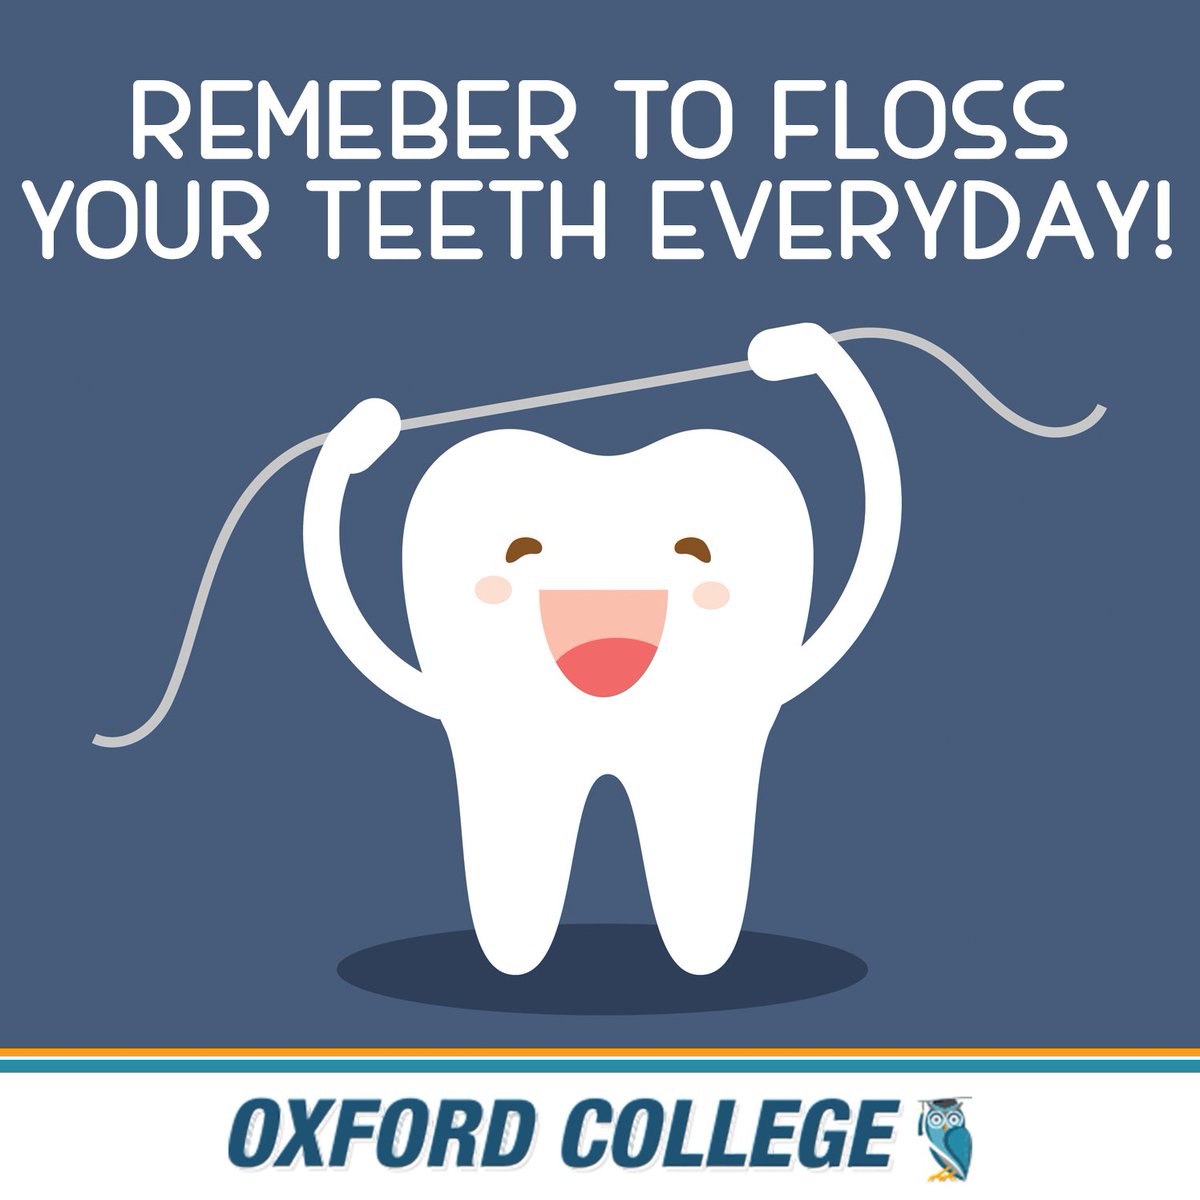 Oxford College on Twitter: "Don't forget to #floss your #teeth today because it is #FlossingDay! #Flossing #DentalHealth #DentalCare #DentalHygiene #healthcare #OxfordCollege https://t.co/AiWjQsUHj6" / Twitter